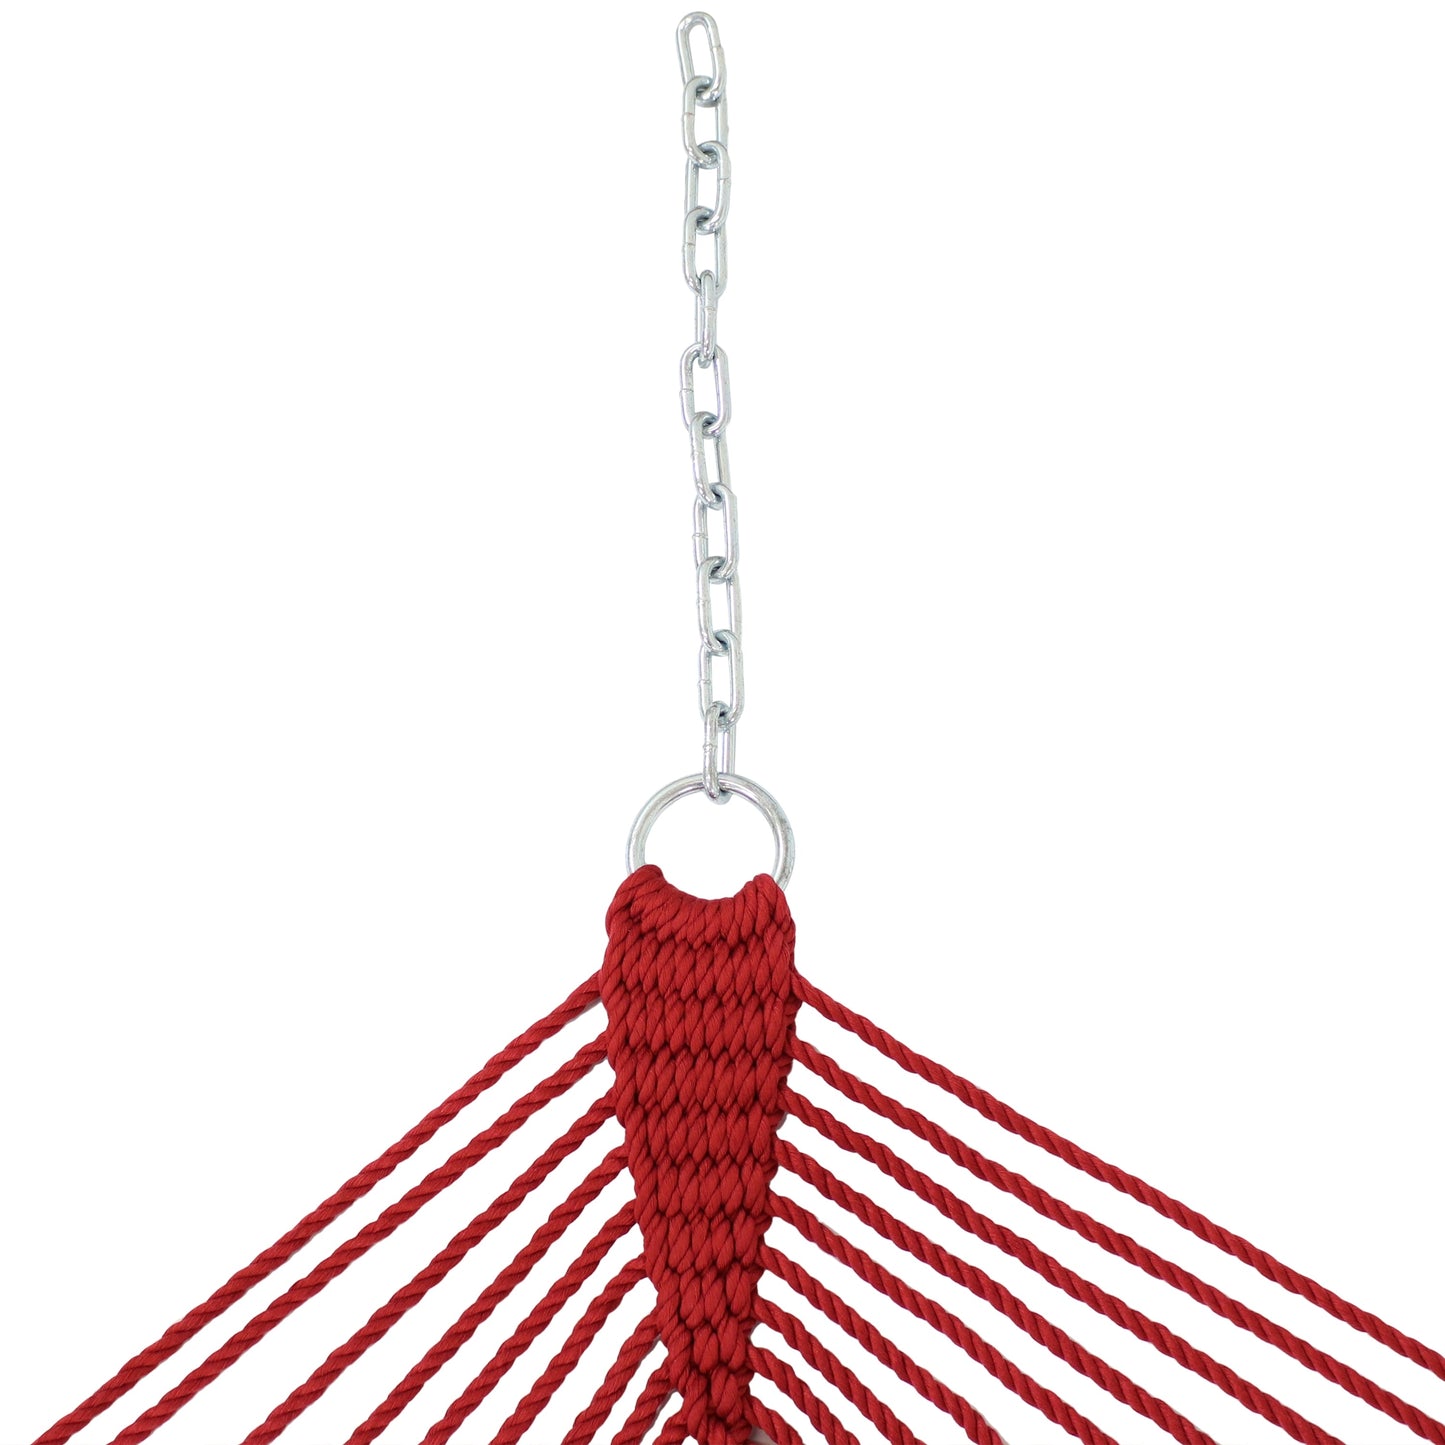 Large Polyester Rope Hammock with Spreader Bars | Holds 2 People | 600lb Capacity